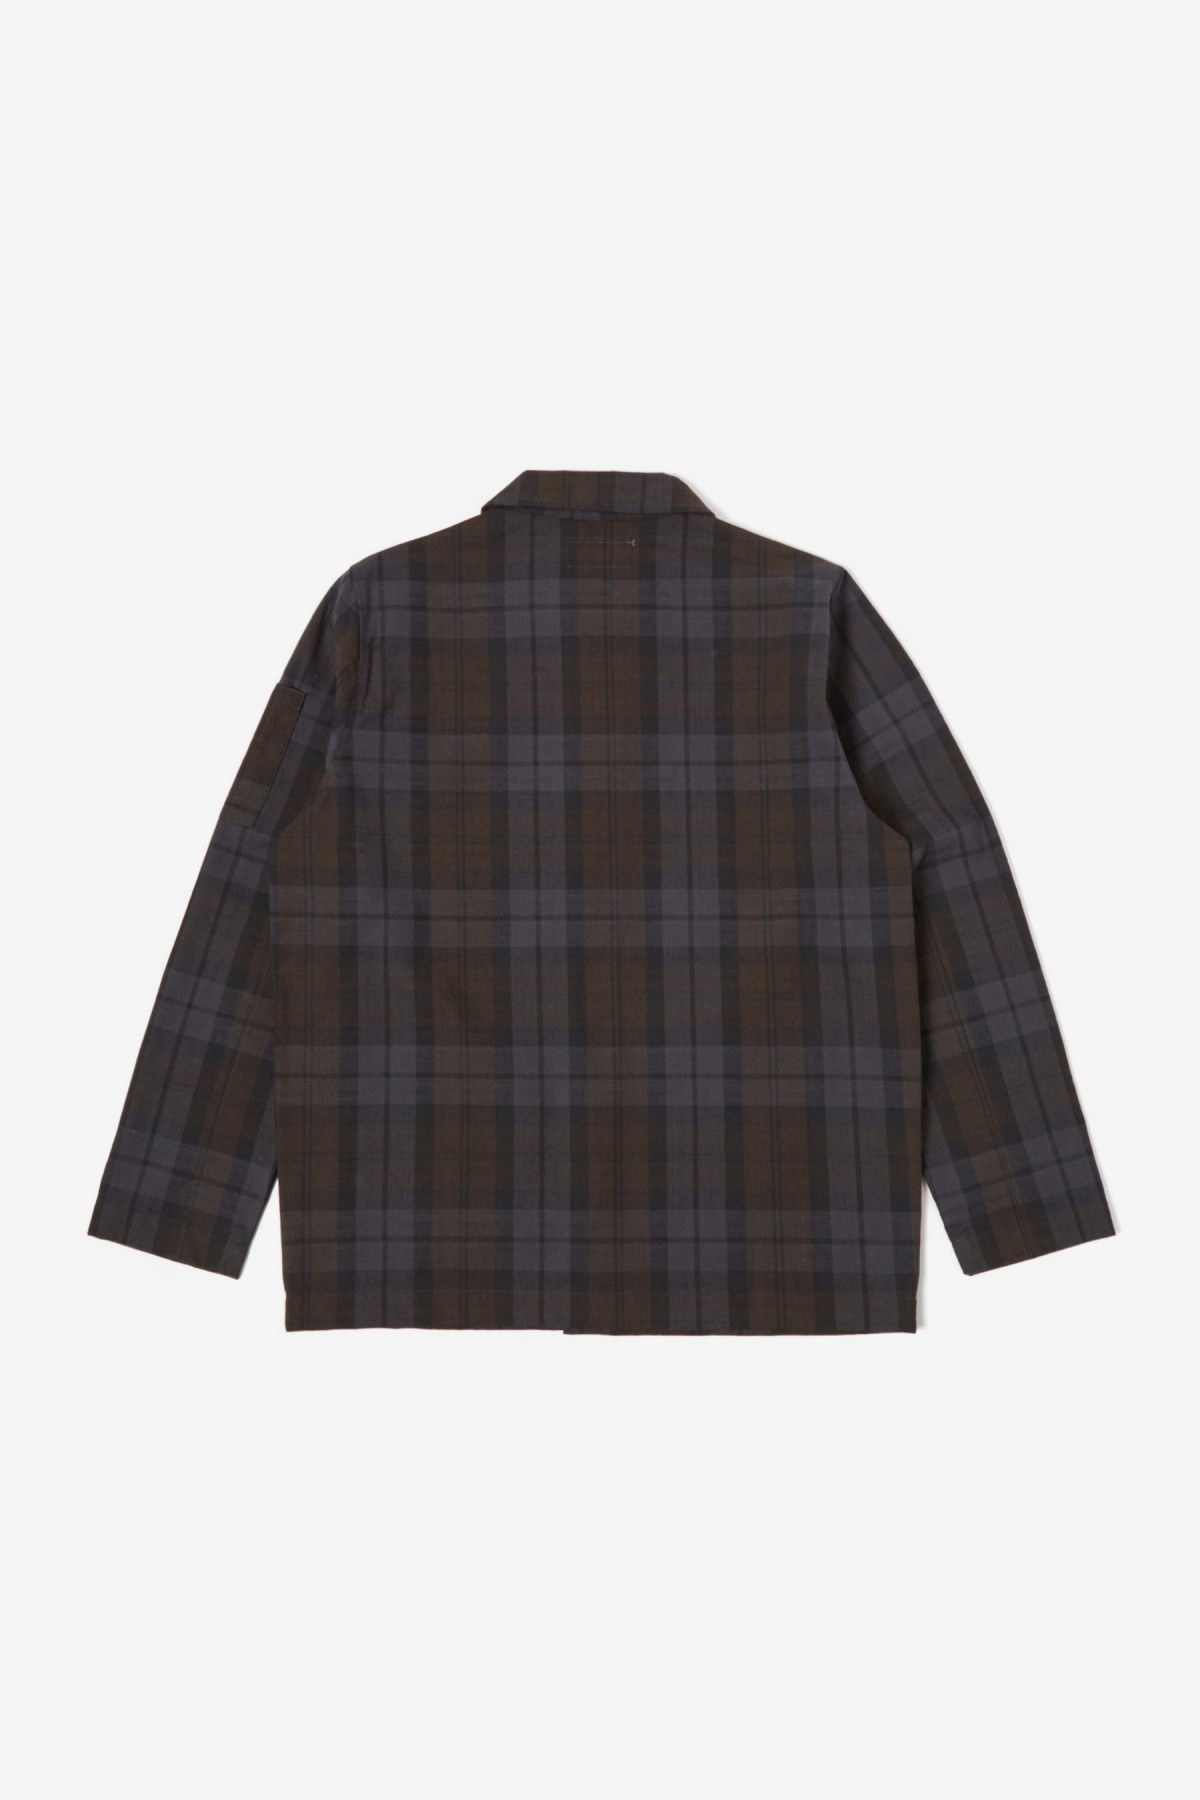 Universal Works Coverall Jacket in Brown/Charcoal Check